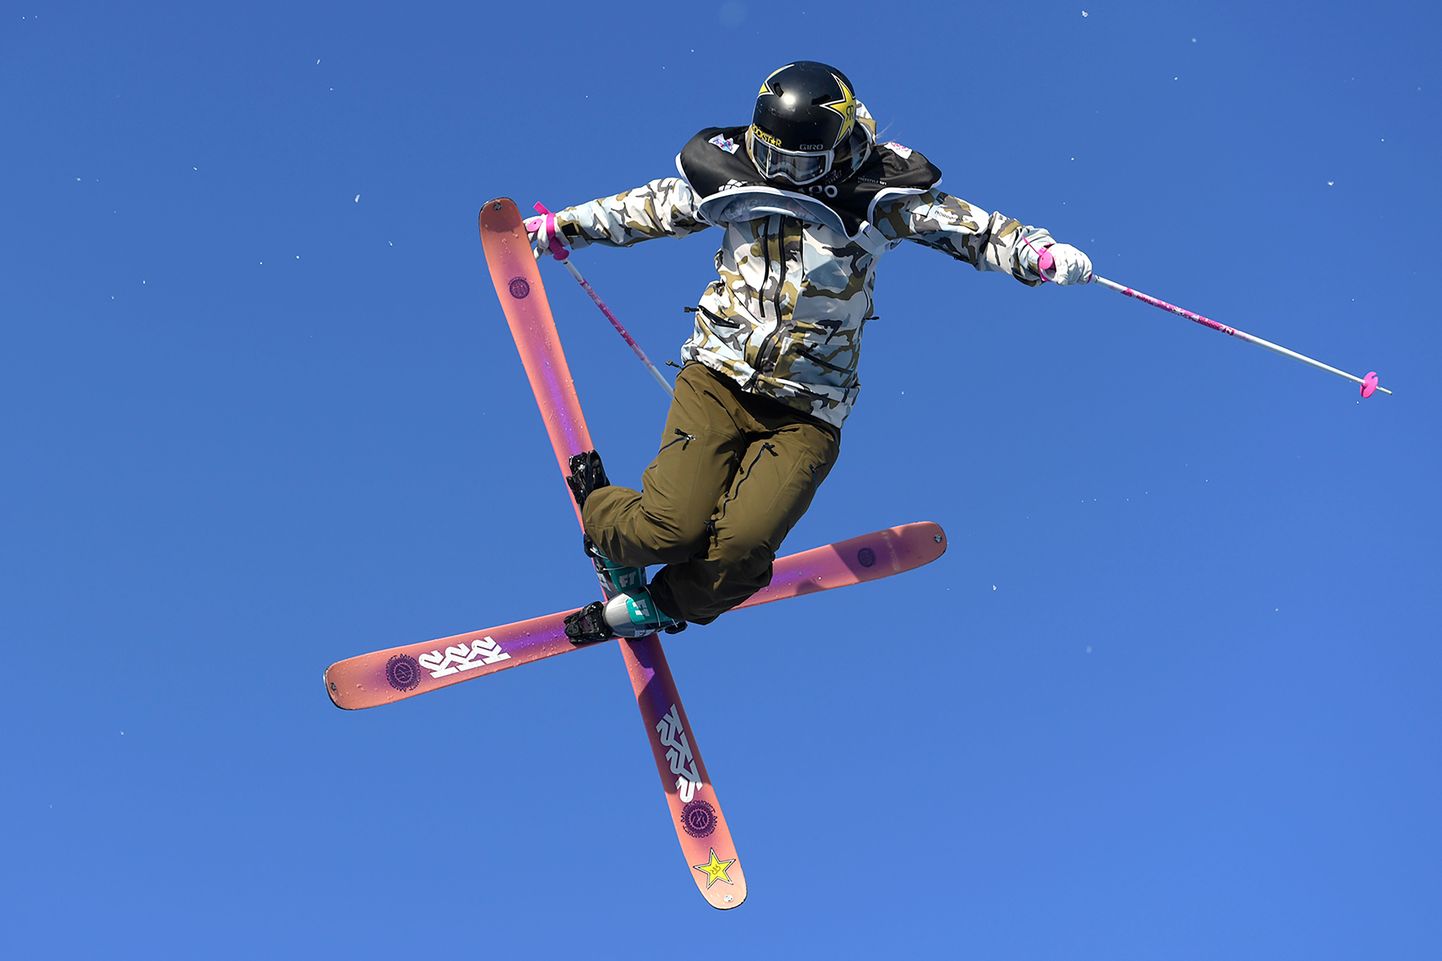 Johanne Killi from Norway competes during the Women's qualification round at the FIS Freestyle World Cup "Big Air" in Milan on November 18, 2017.  / AFP PHOTO / MIGUEL MEDINA